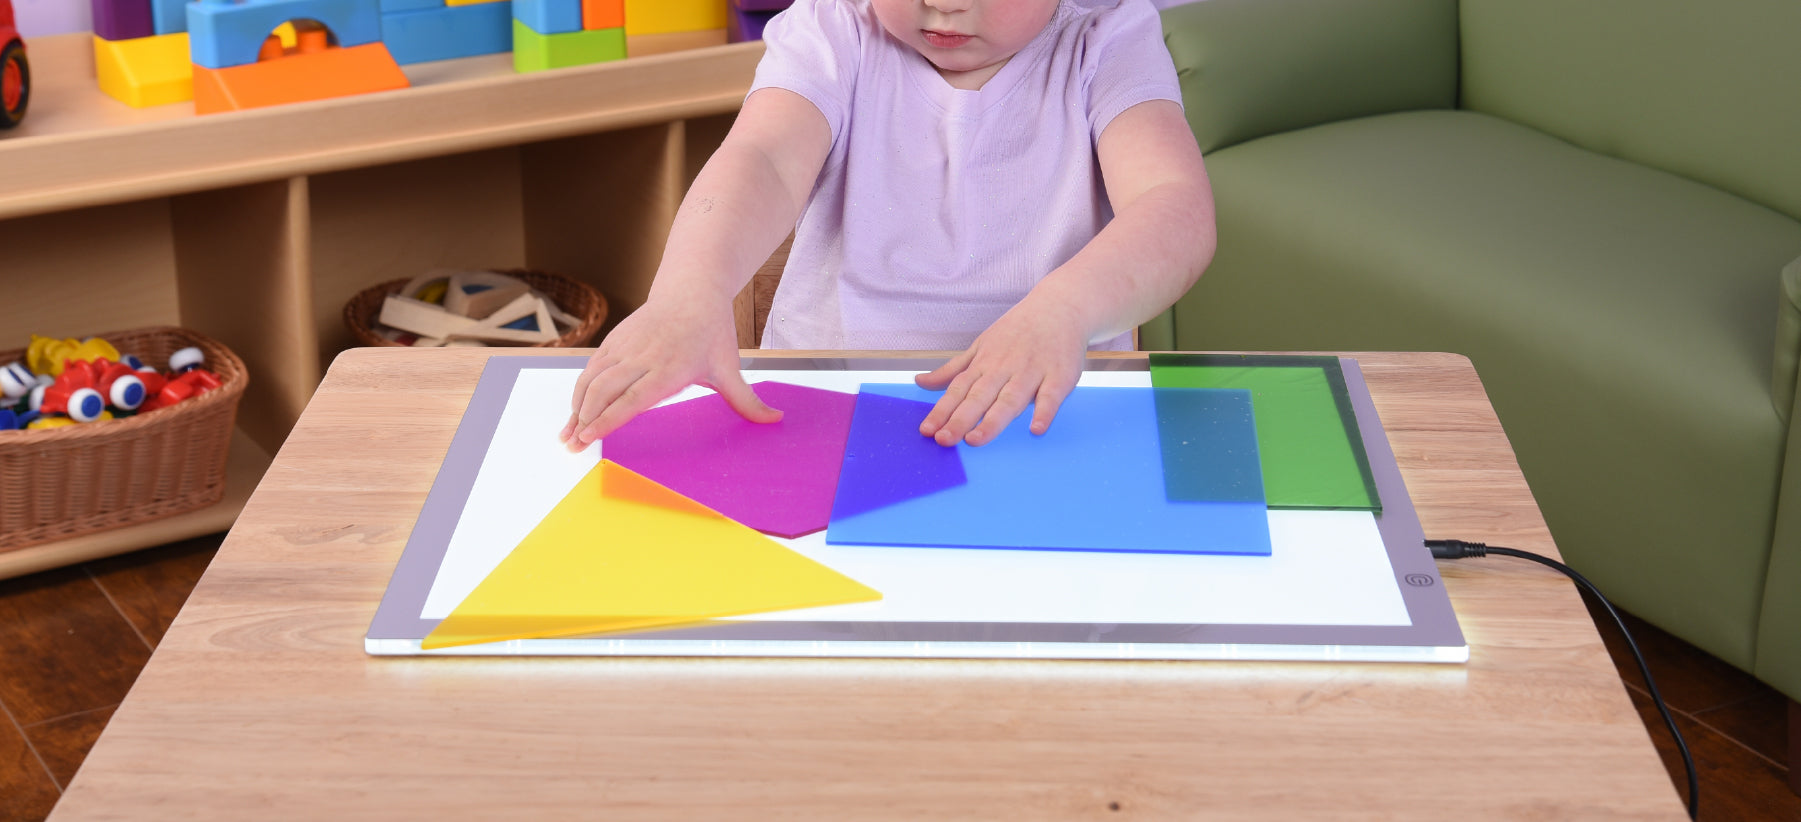 Children in classroom playing with colorful manipulatives on a light table